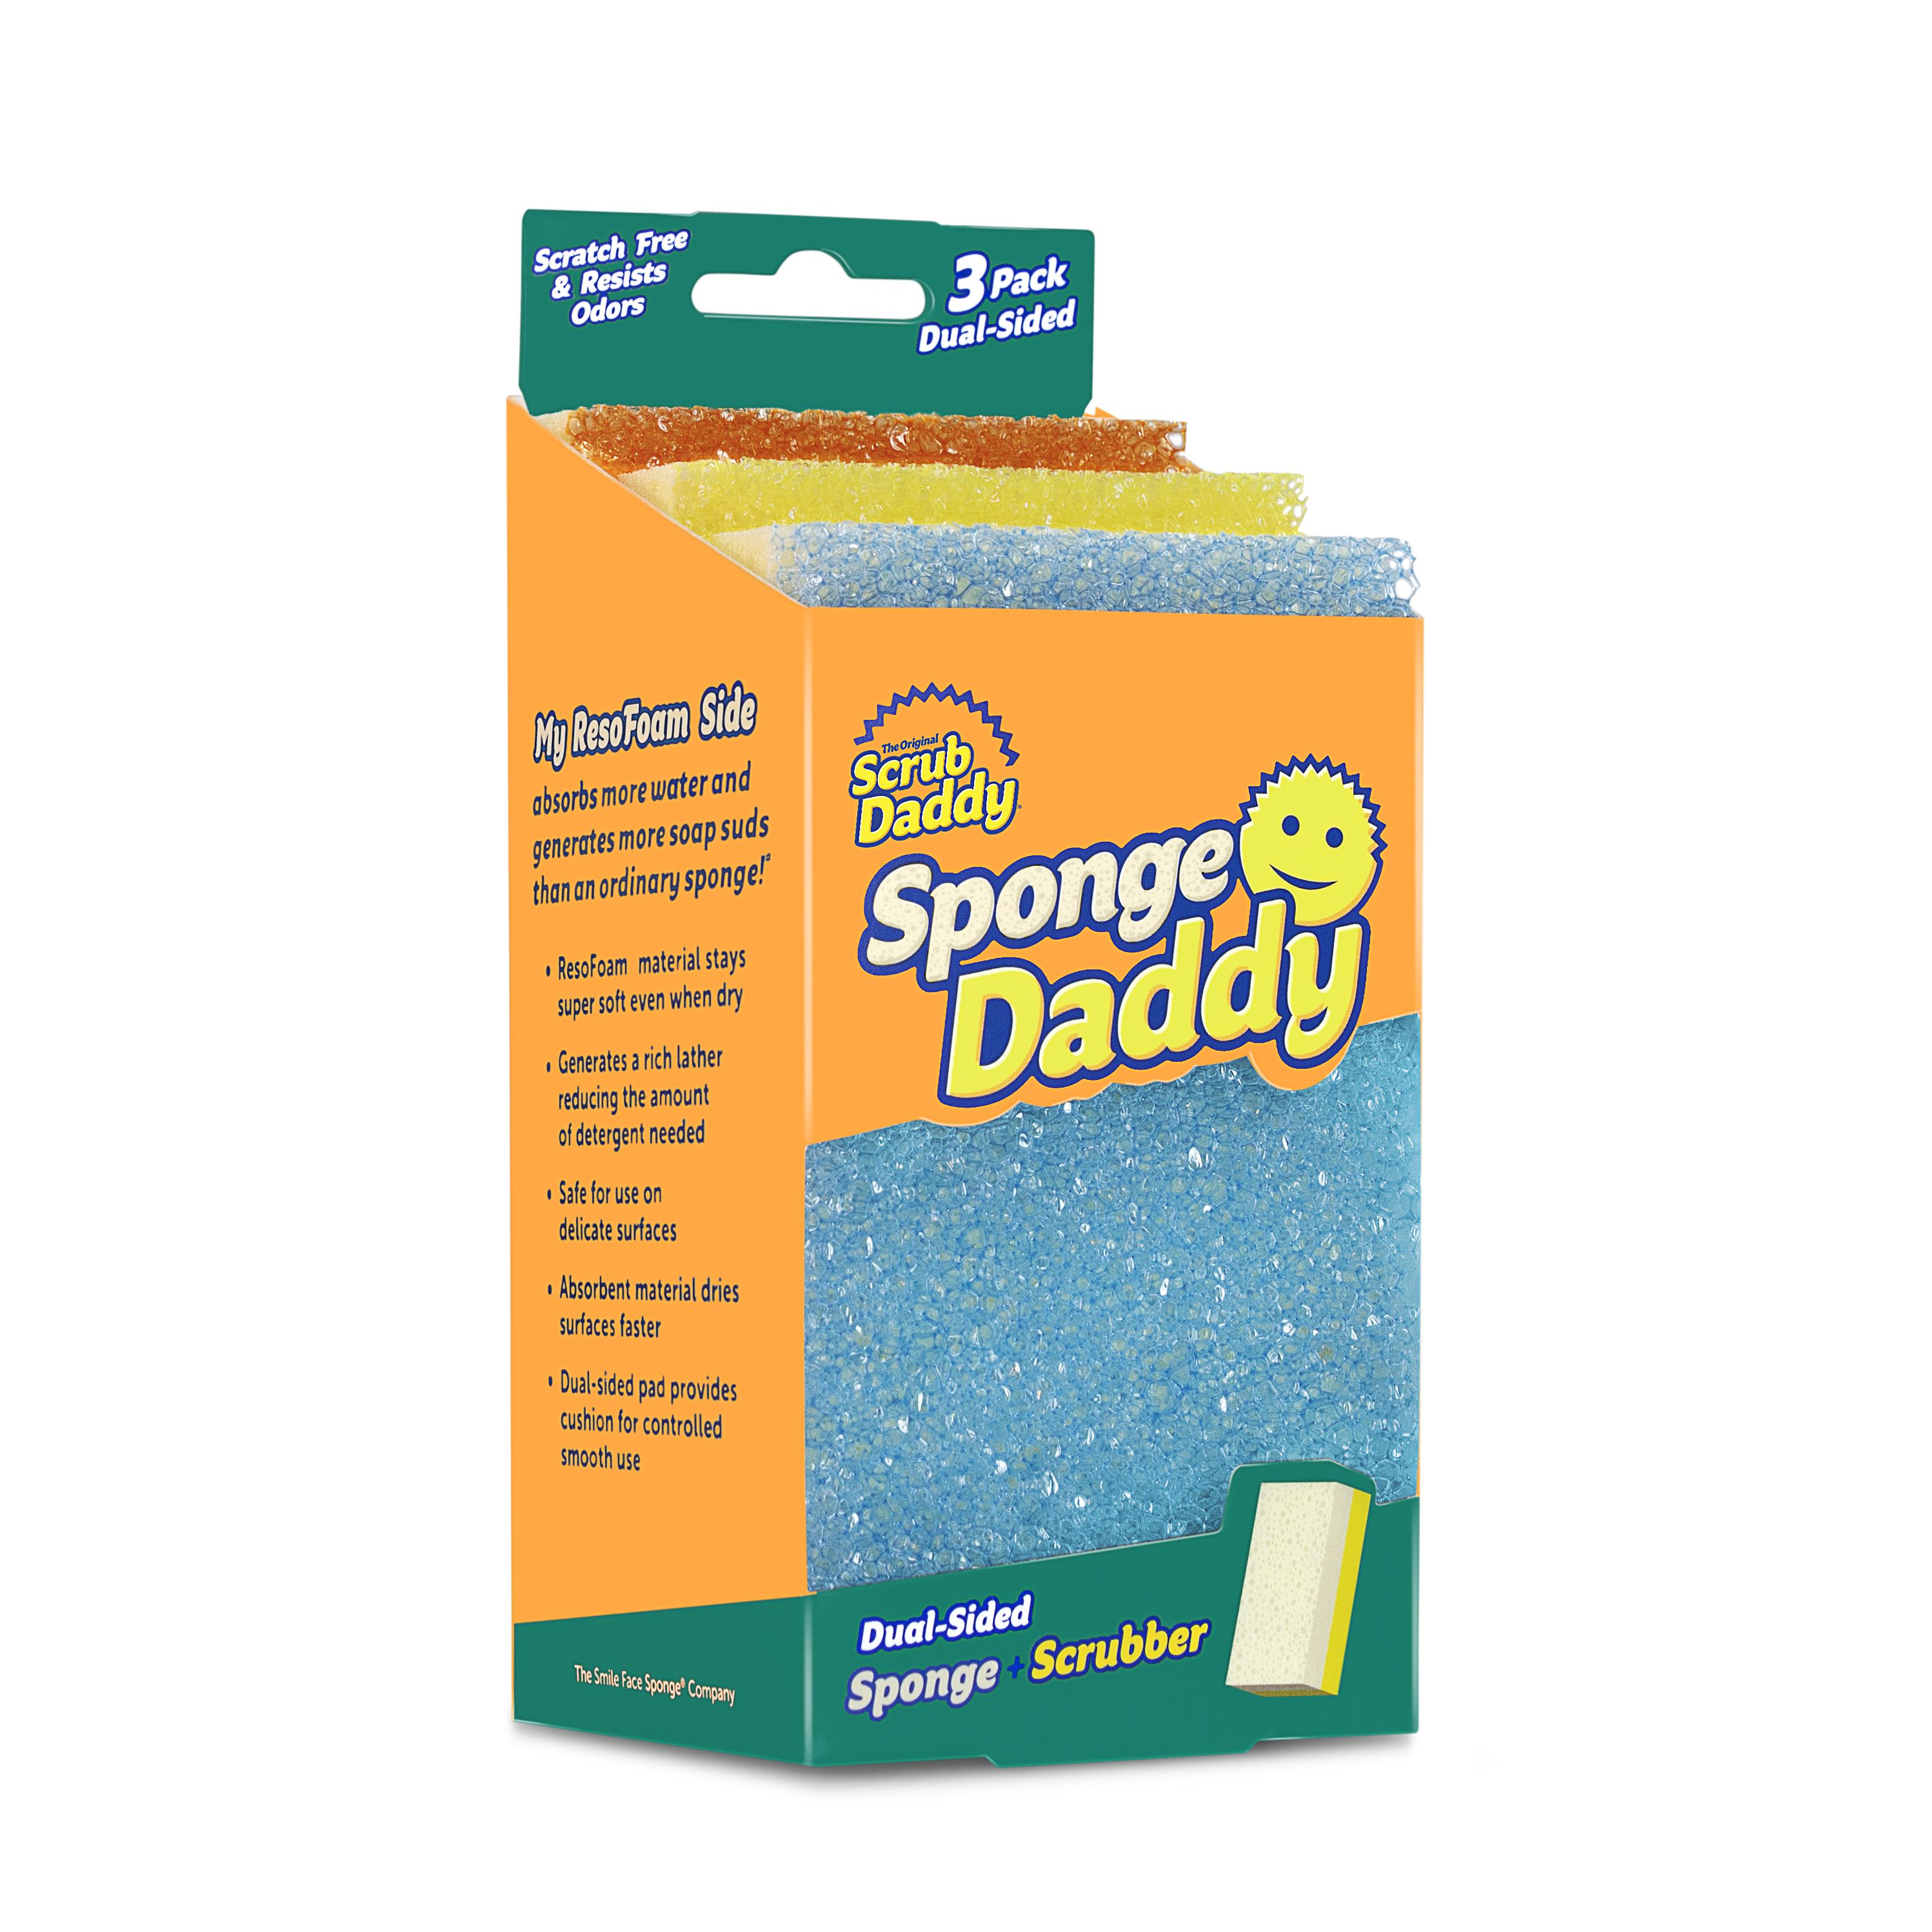 Scrub Daddy Sponge Daddy Cellulose Sponge with Scouring Pad (3